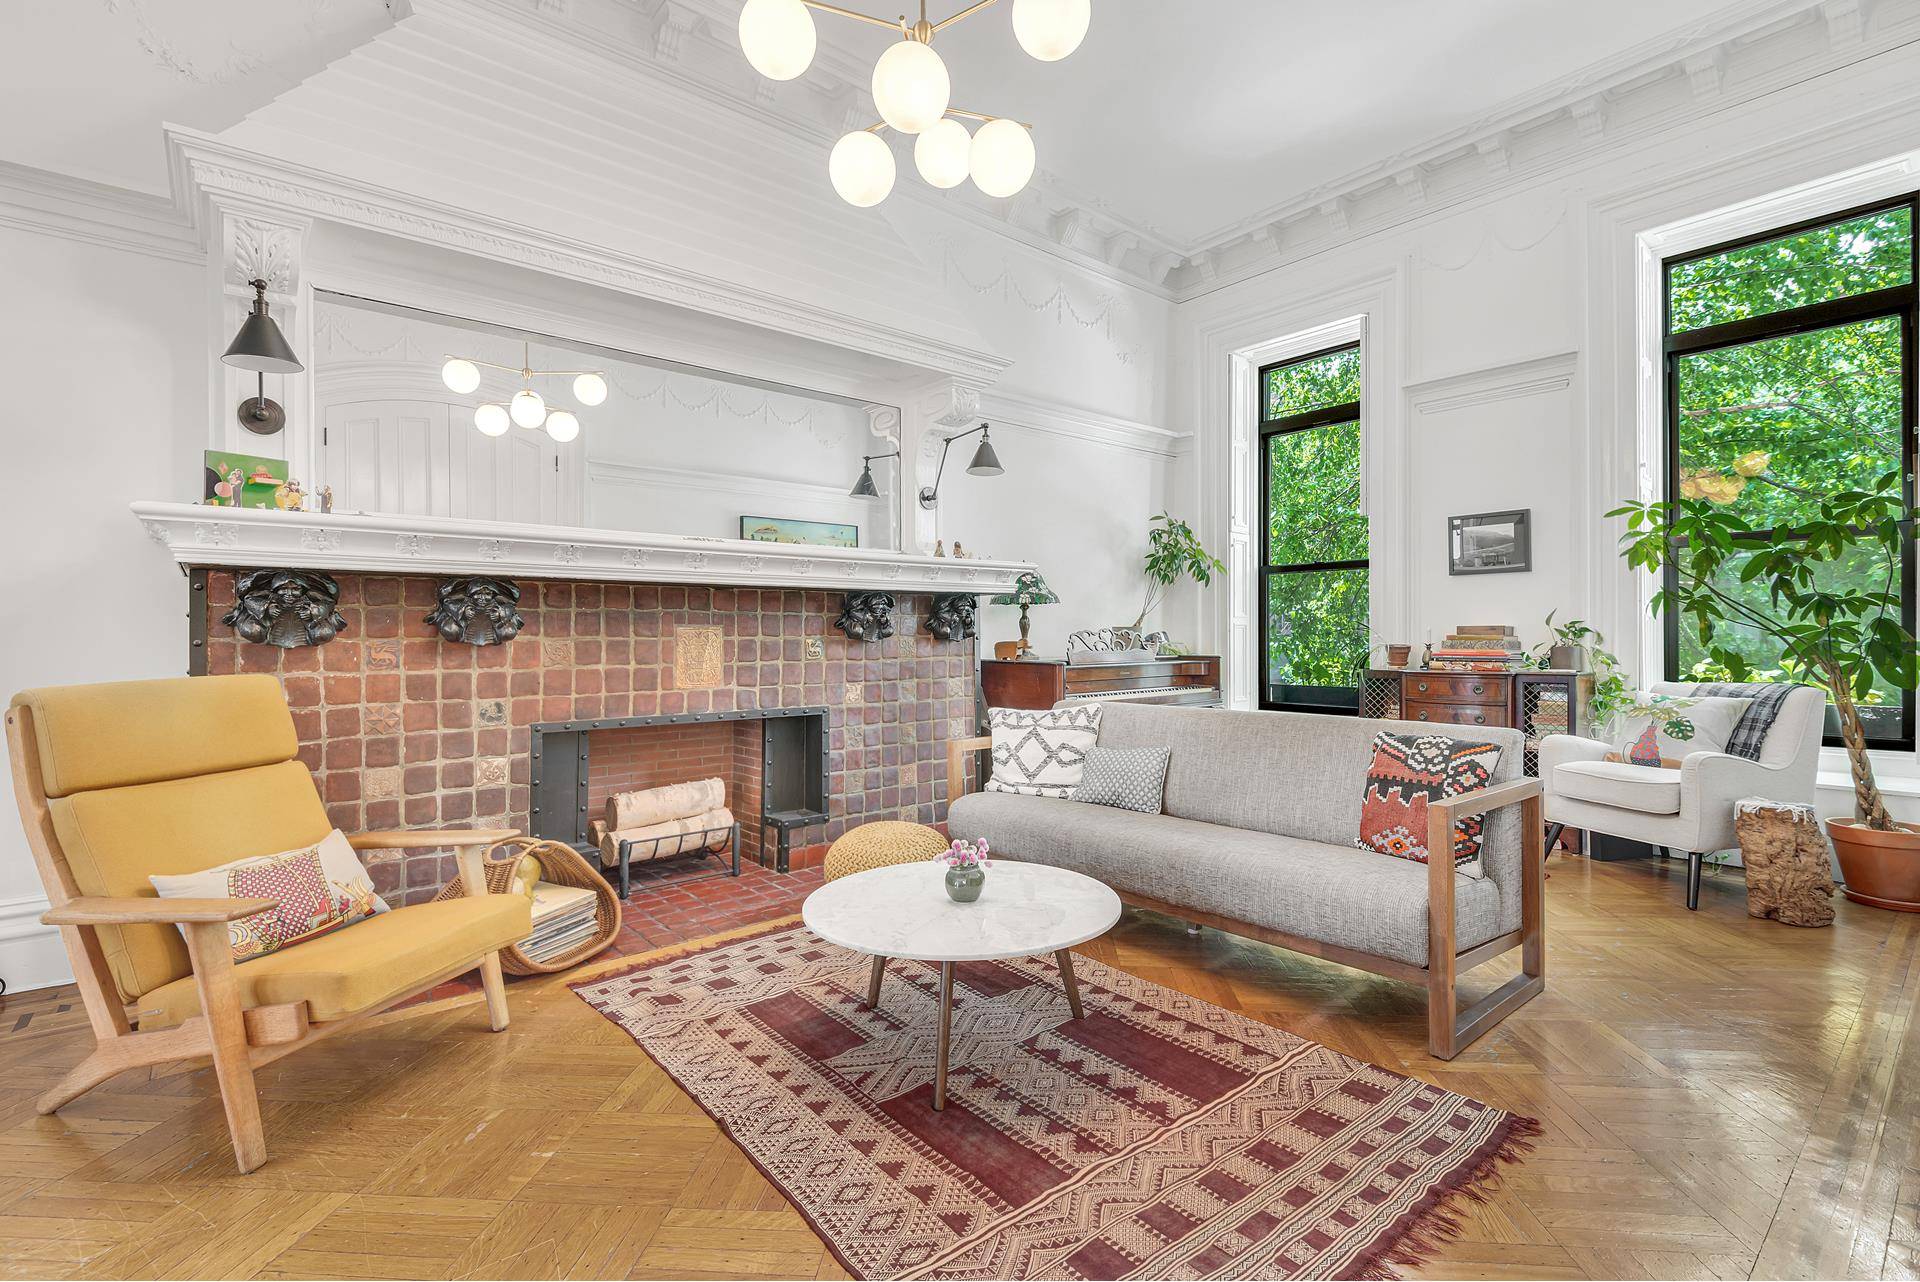 Magnificent 3 family townhouse in prime Clinton Hill, situated on a desirable tree lined street in one of Brooklyn's most sought after neighborhoods.